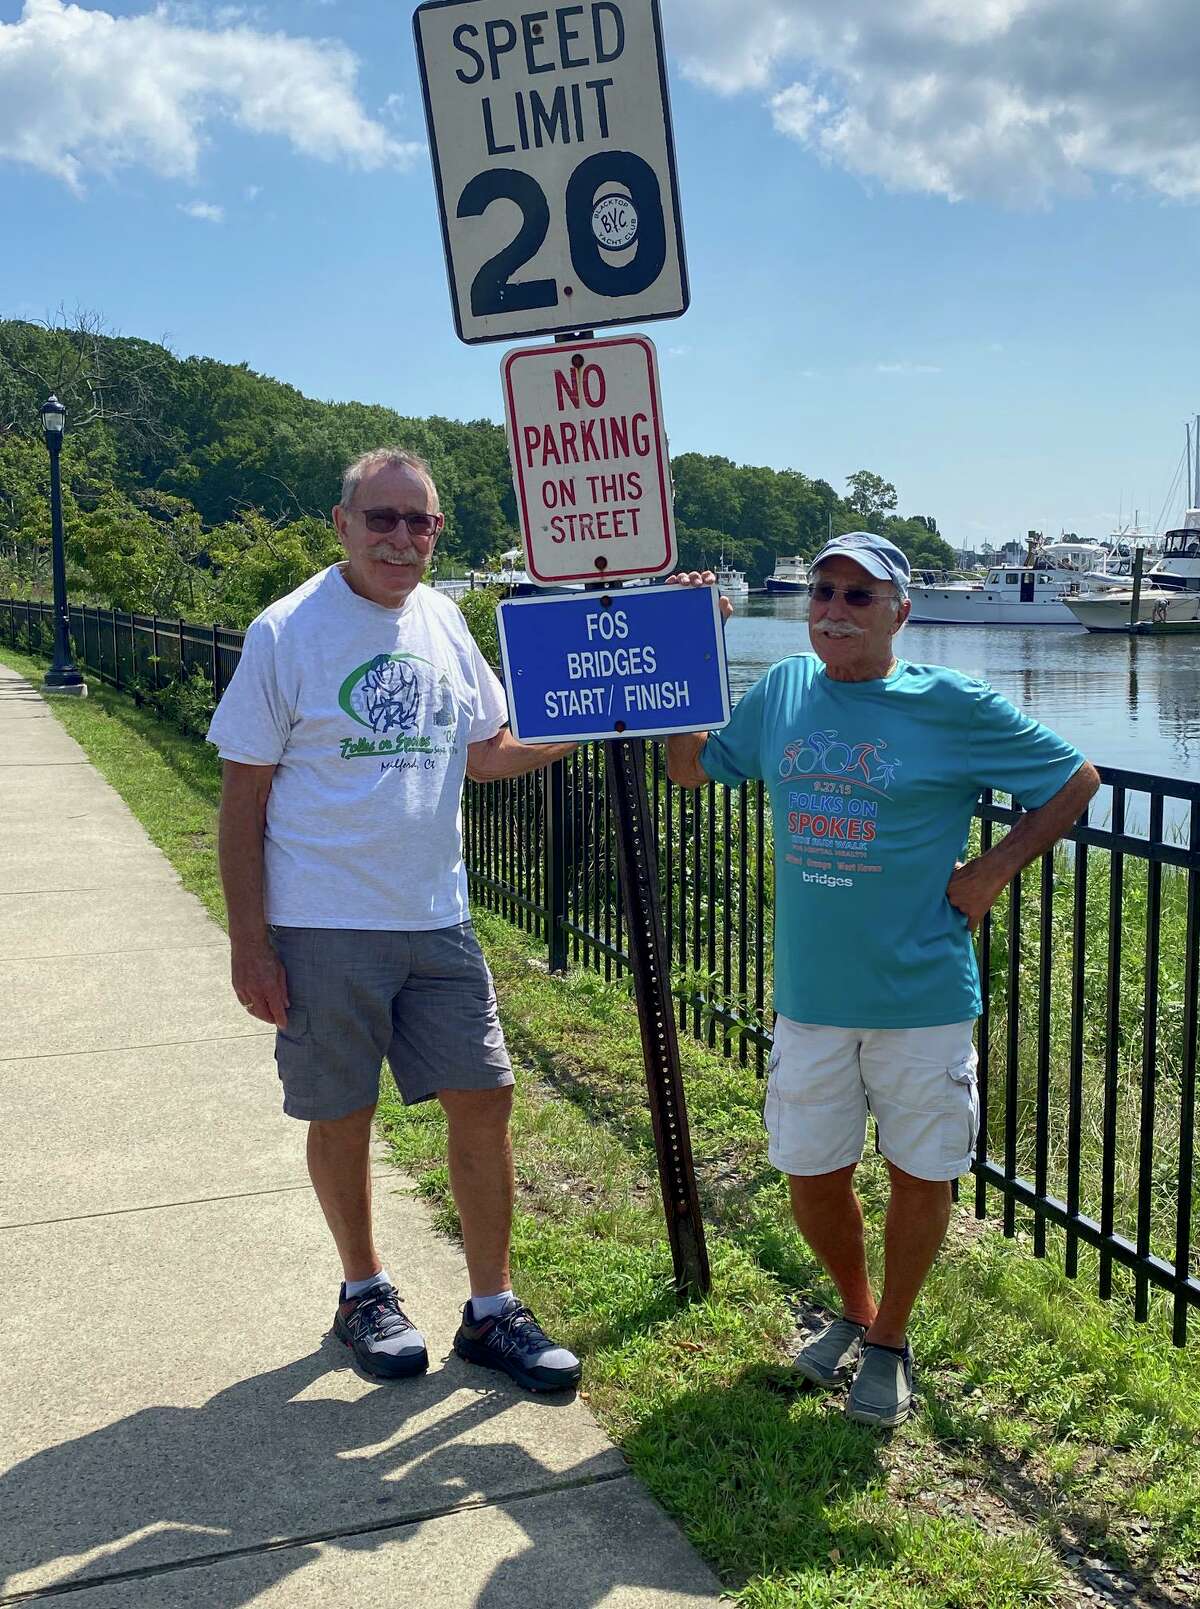 Event founders, Al Diamond and Ray Vitali are Grand Marshals of 30th anniversary of the Folks on Spokes Ride/Step Forward Walk Fundraiser. The fundraiser, to support Bridges Healthcare’s mental health and addiction recovery services is on Oct. 3.